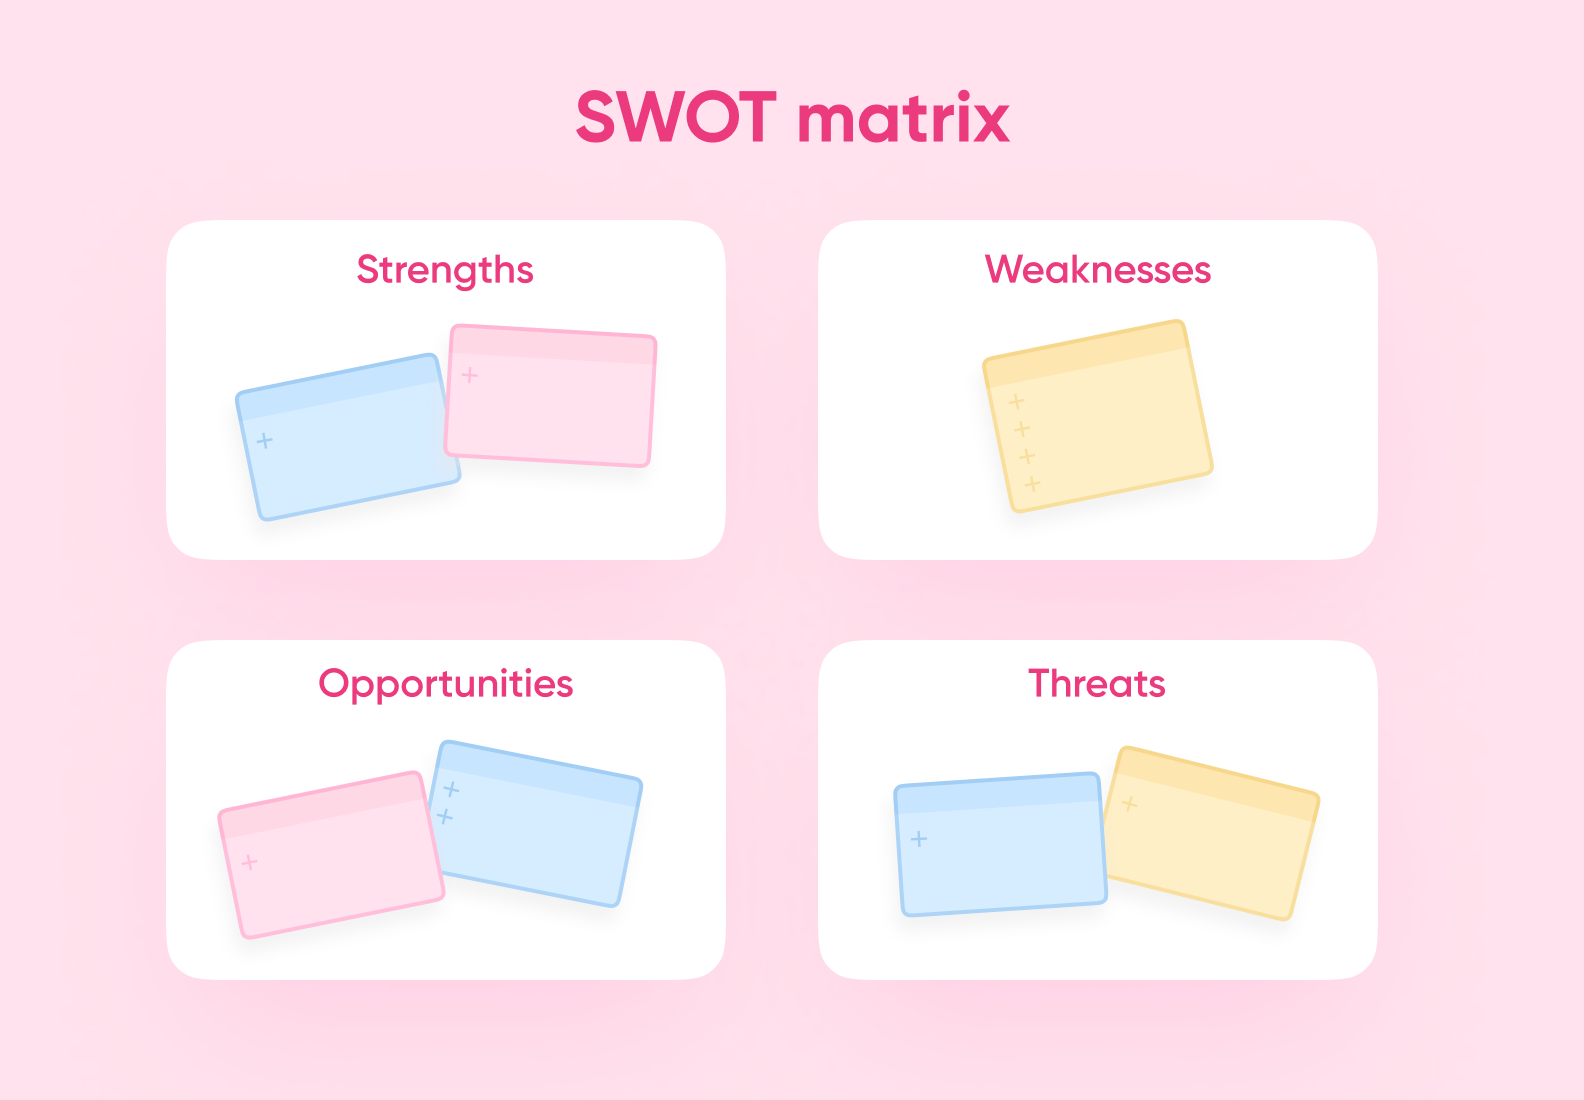 SWOT matrix helps you to determine your business' strenghts, weaknesses, opportunities and threats